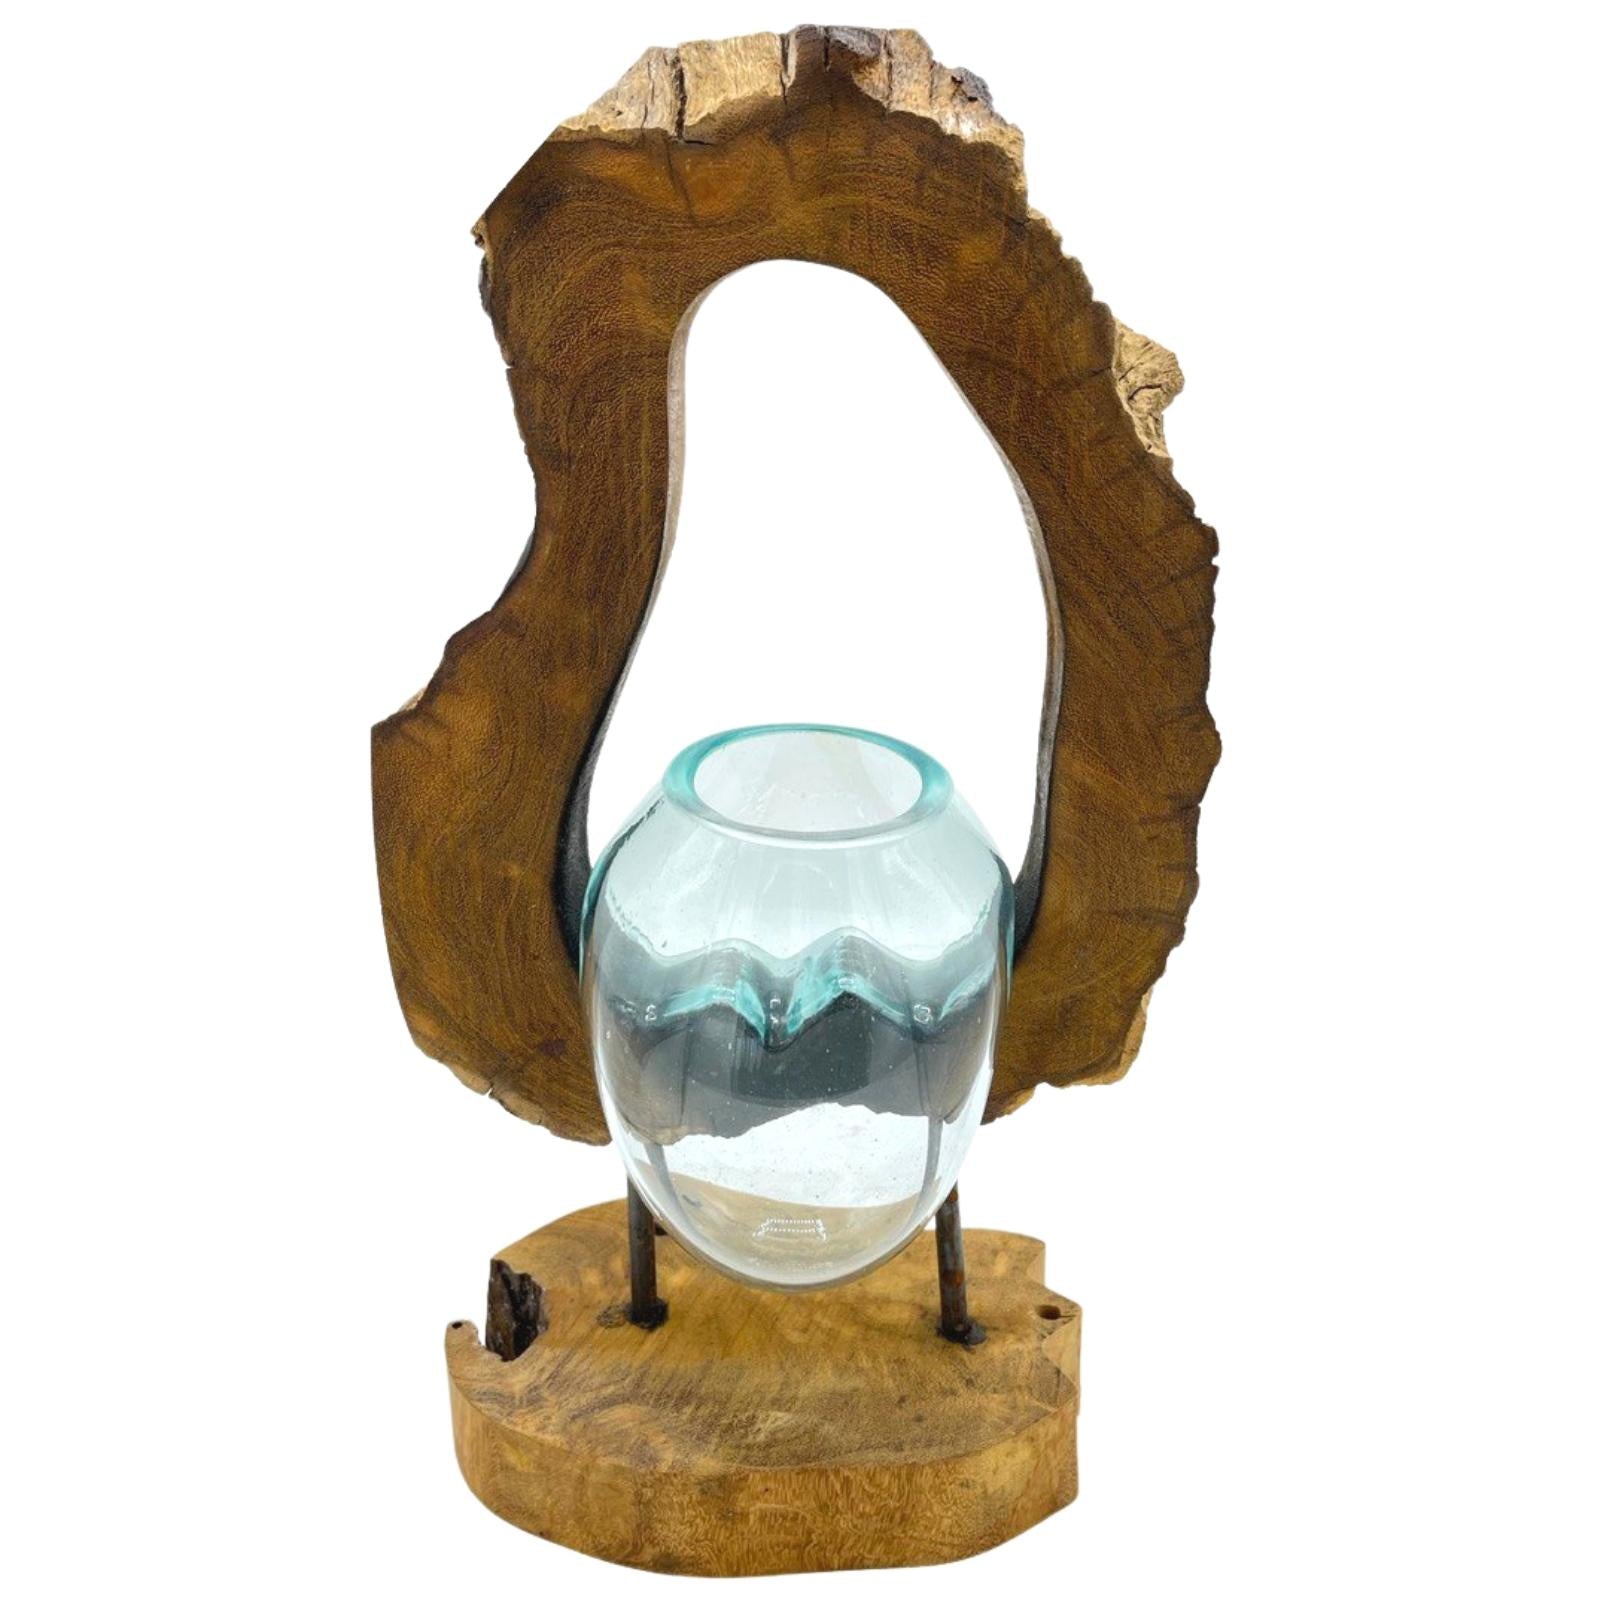 View Molton Glass Hanging Art Vase on Wood information